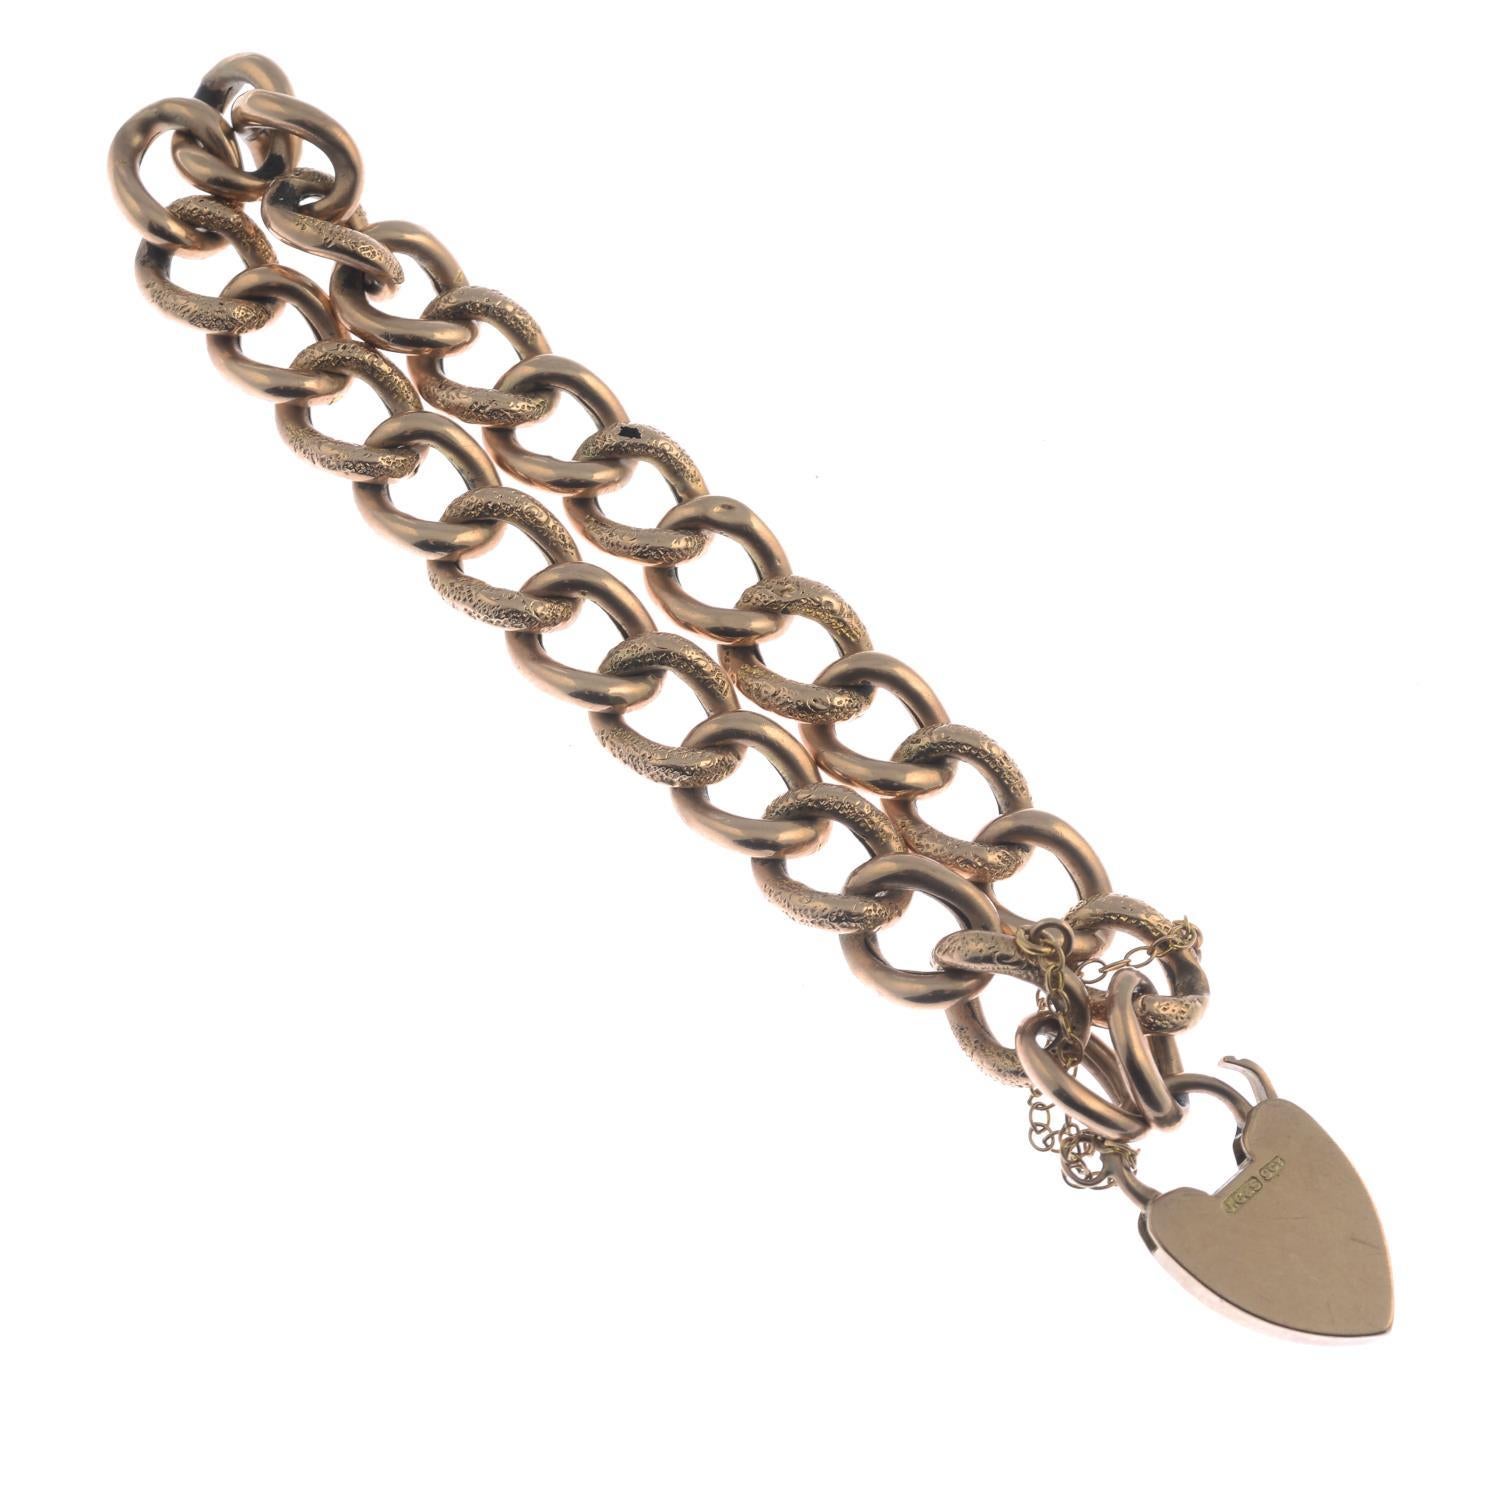 Designed as a graduated textured and polished curb-link chain, with heart-shape padlock clasp. Length 18cms. Weight 12.3gms. 
Padlock clasp with maker's mark 'J.G&S'